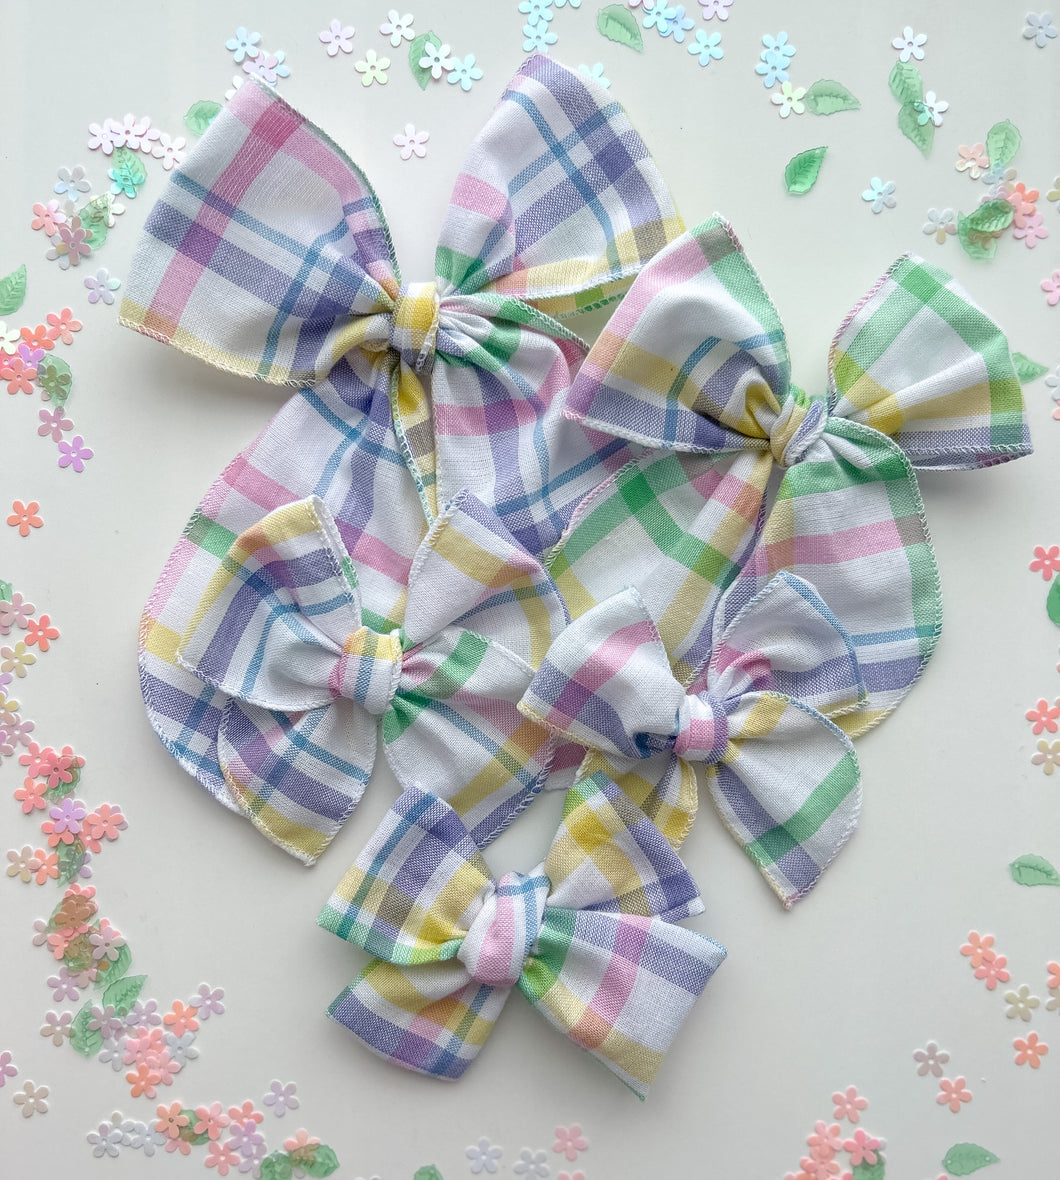 The Easter Plaid Wholesale Bow